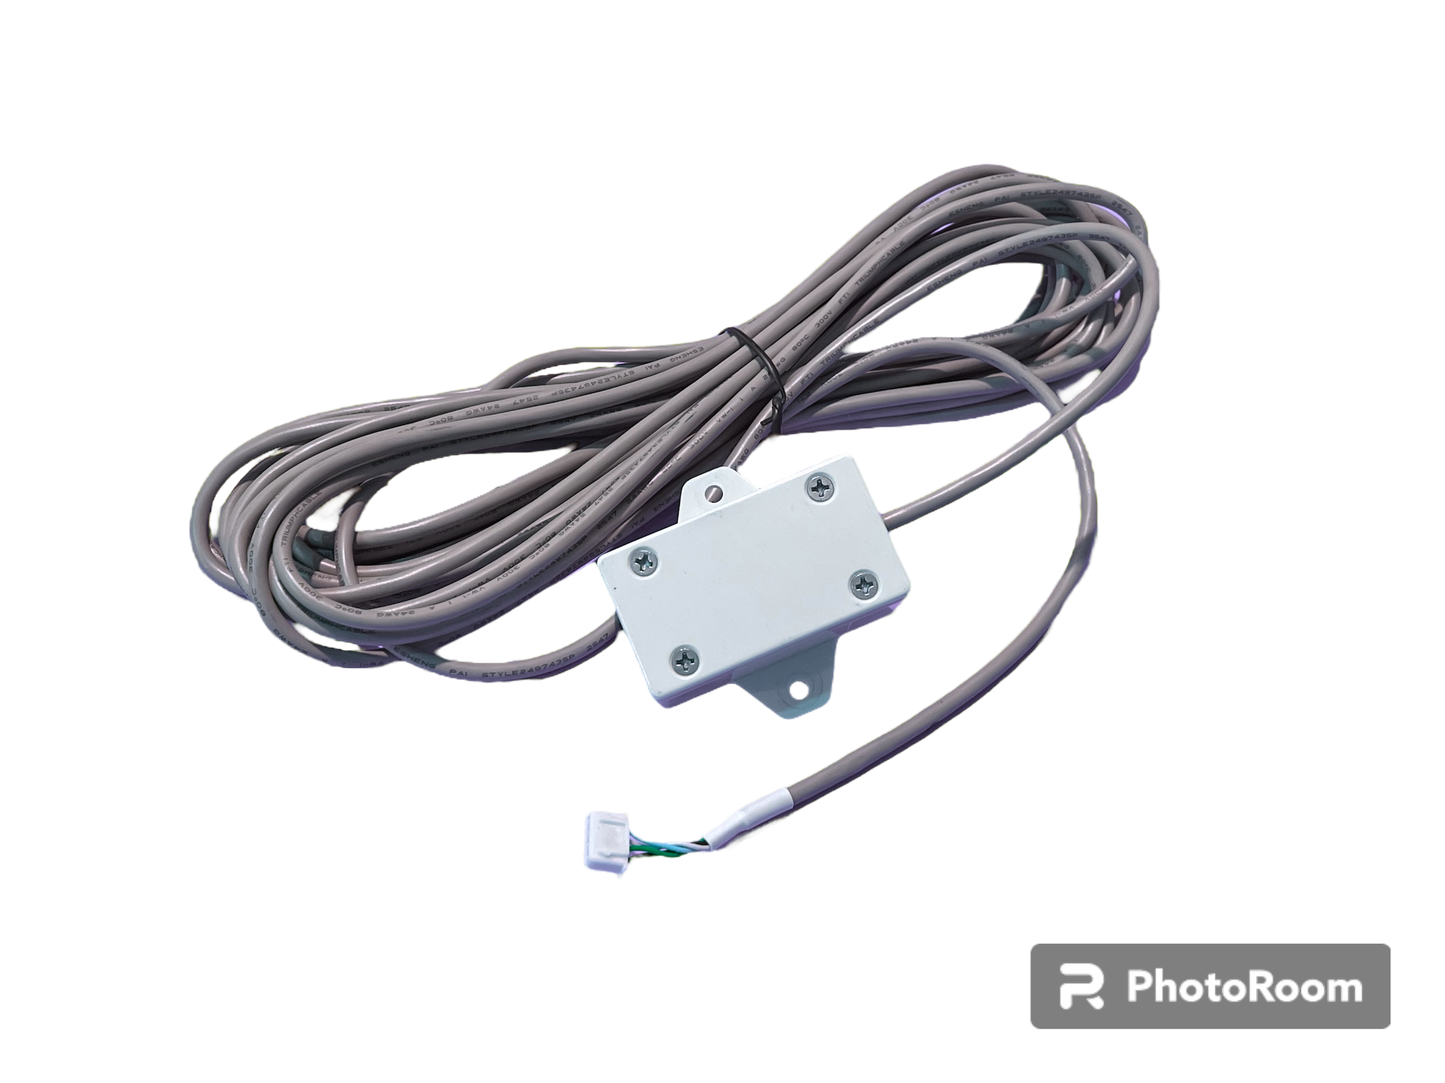 Replacement elevation sensor with 15m cable for NZSAT WindUp